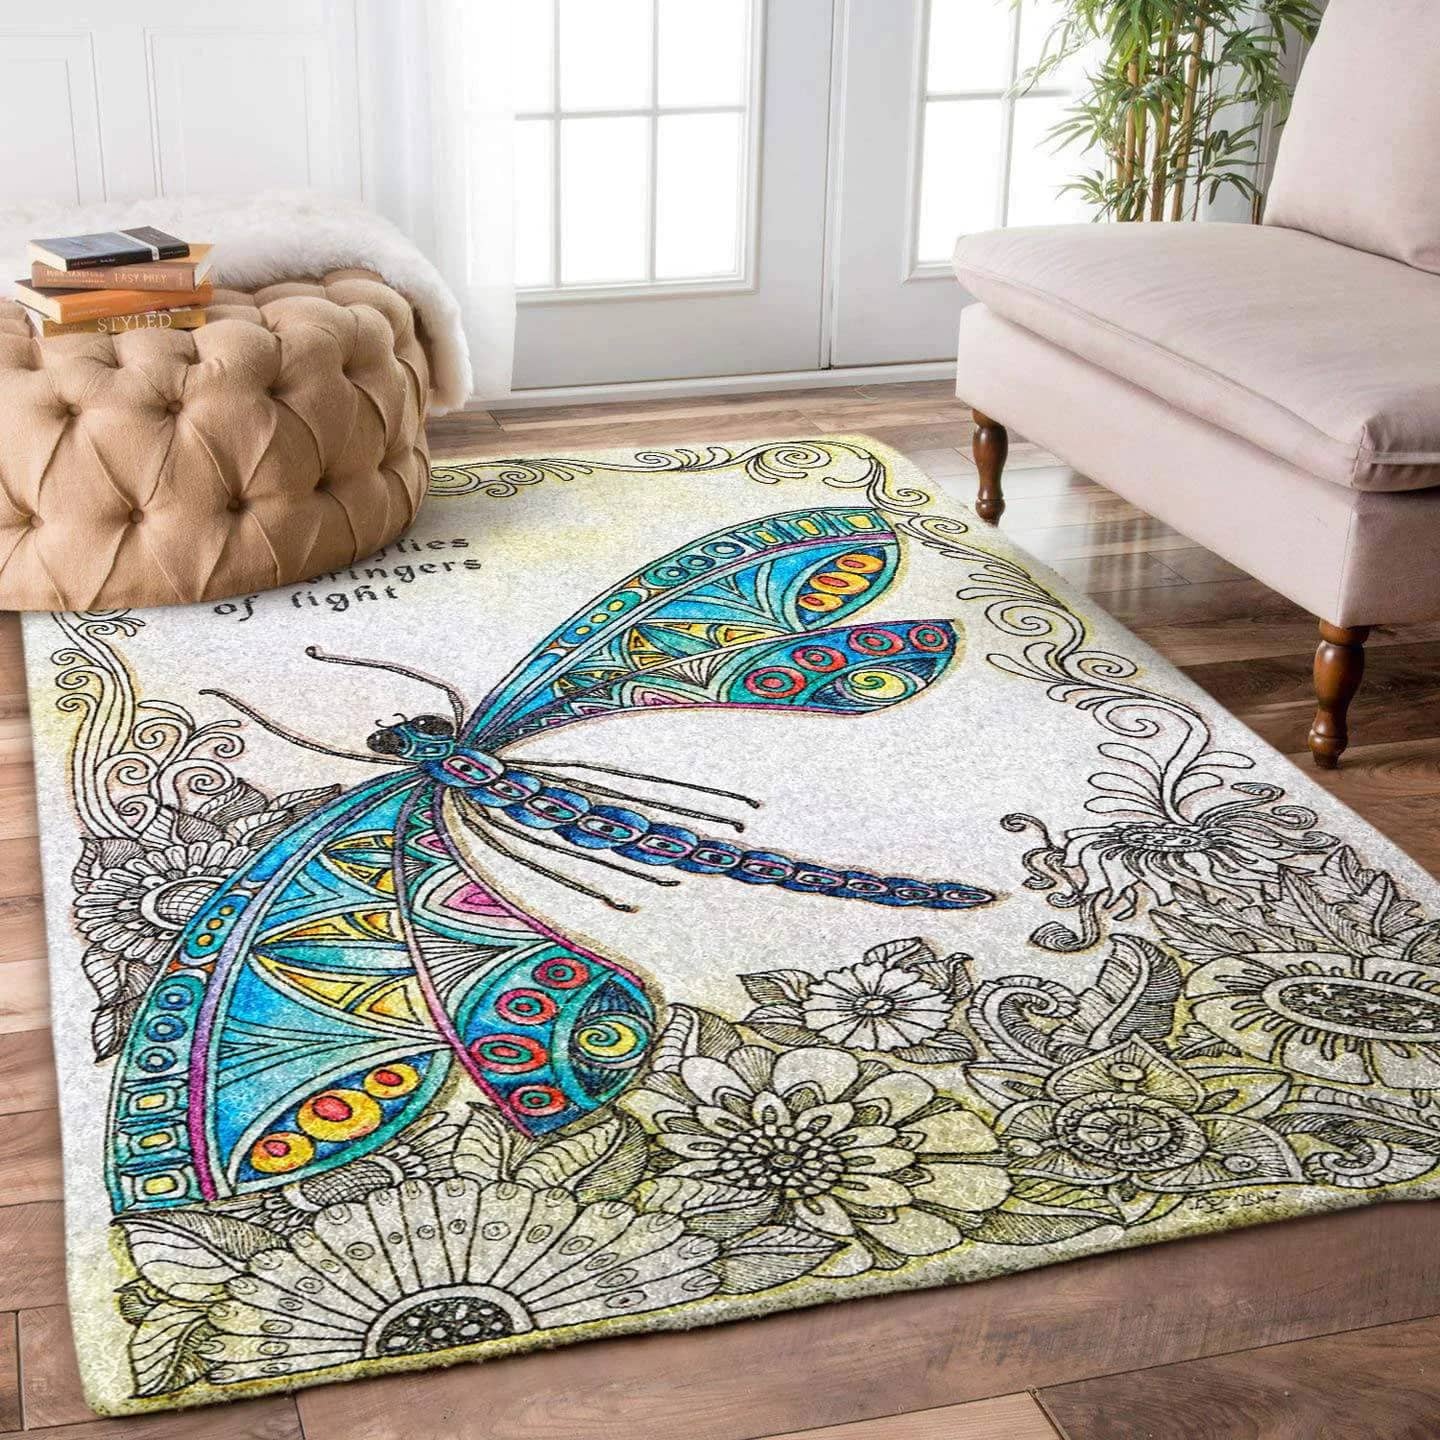 Dragonfly Limited Edition Amazon Best Seller Sku 267973 Rug